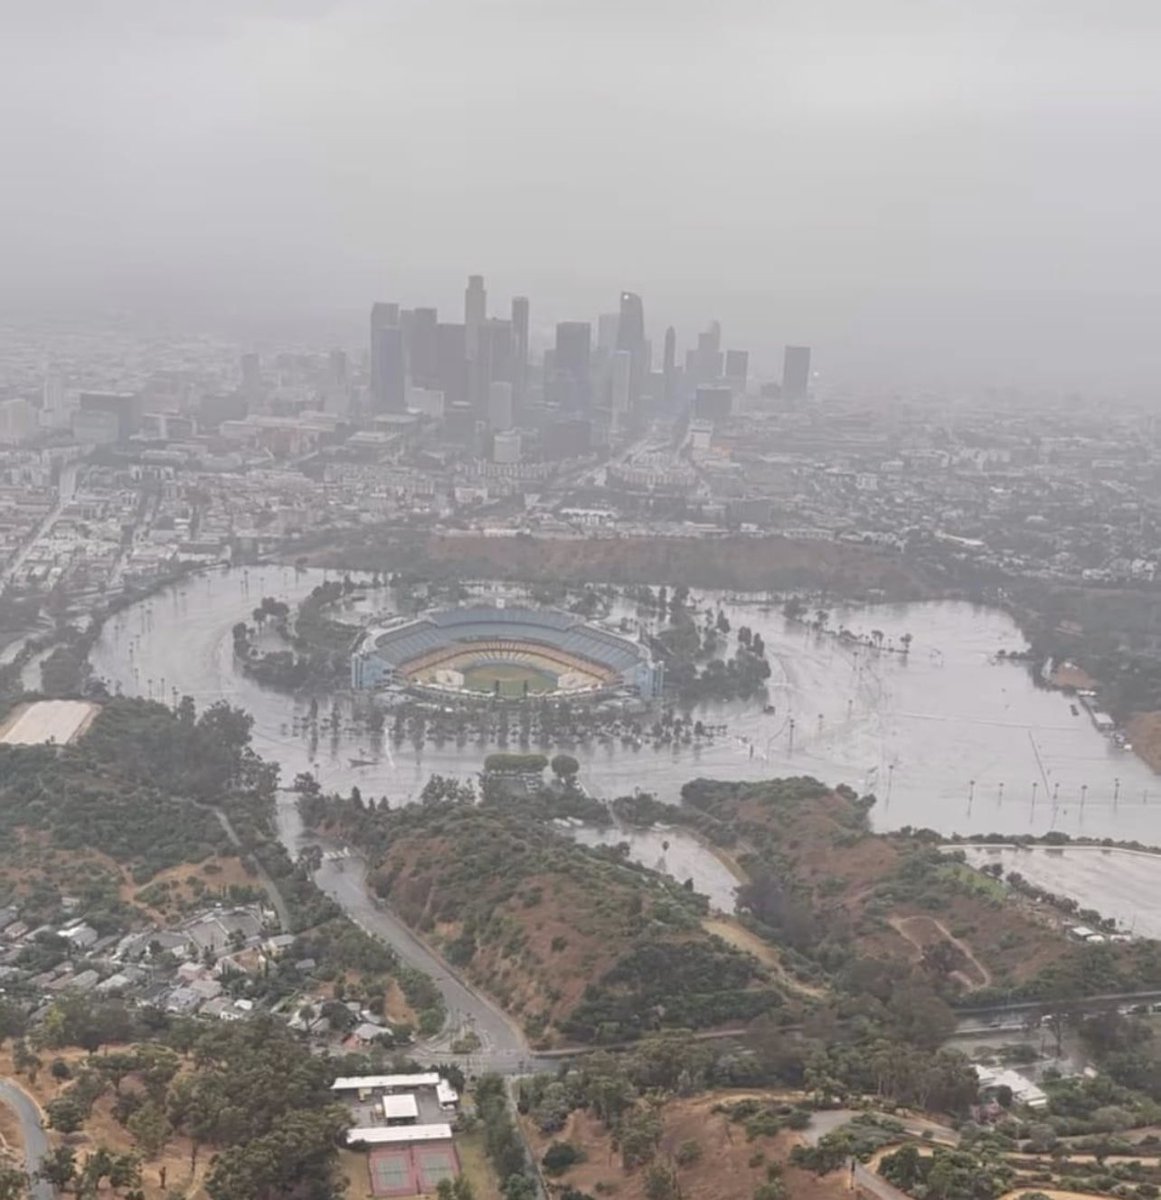 This is Dodger stadium right now 😲